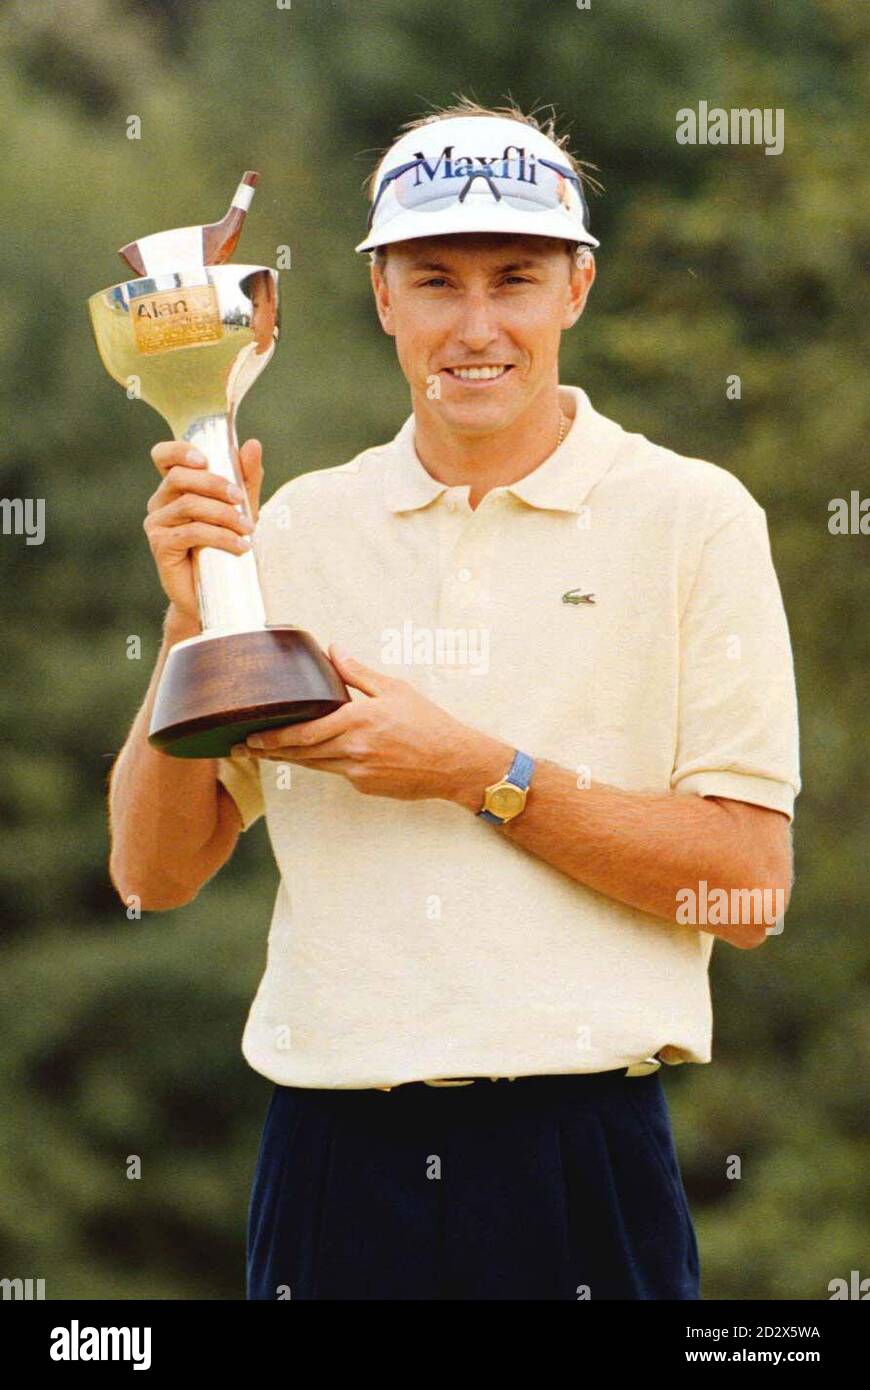 Robert Allenby after gaining victory in the Alamo English Open Championship at the Forest of Arden today (sunday).  Stock Photo